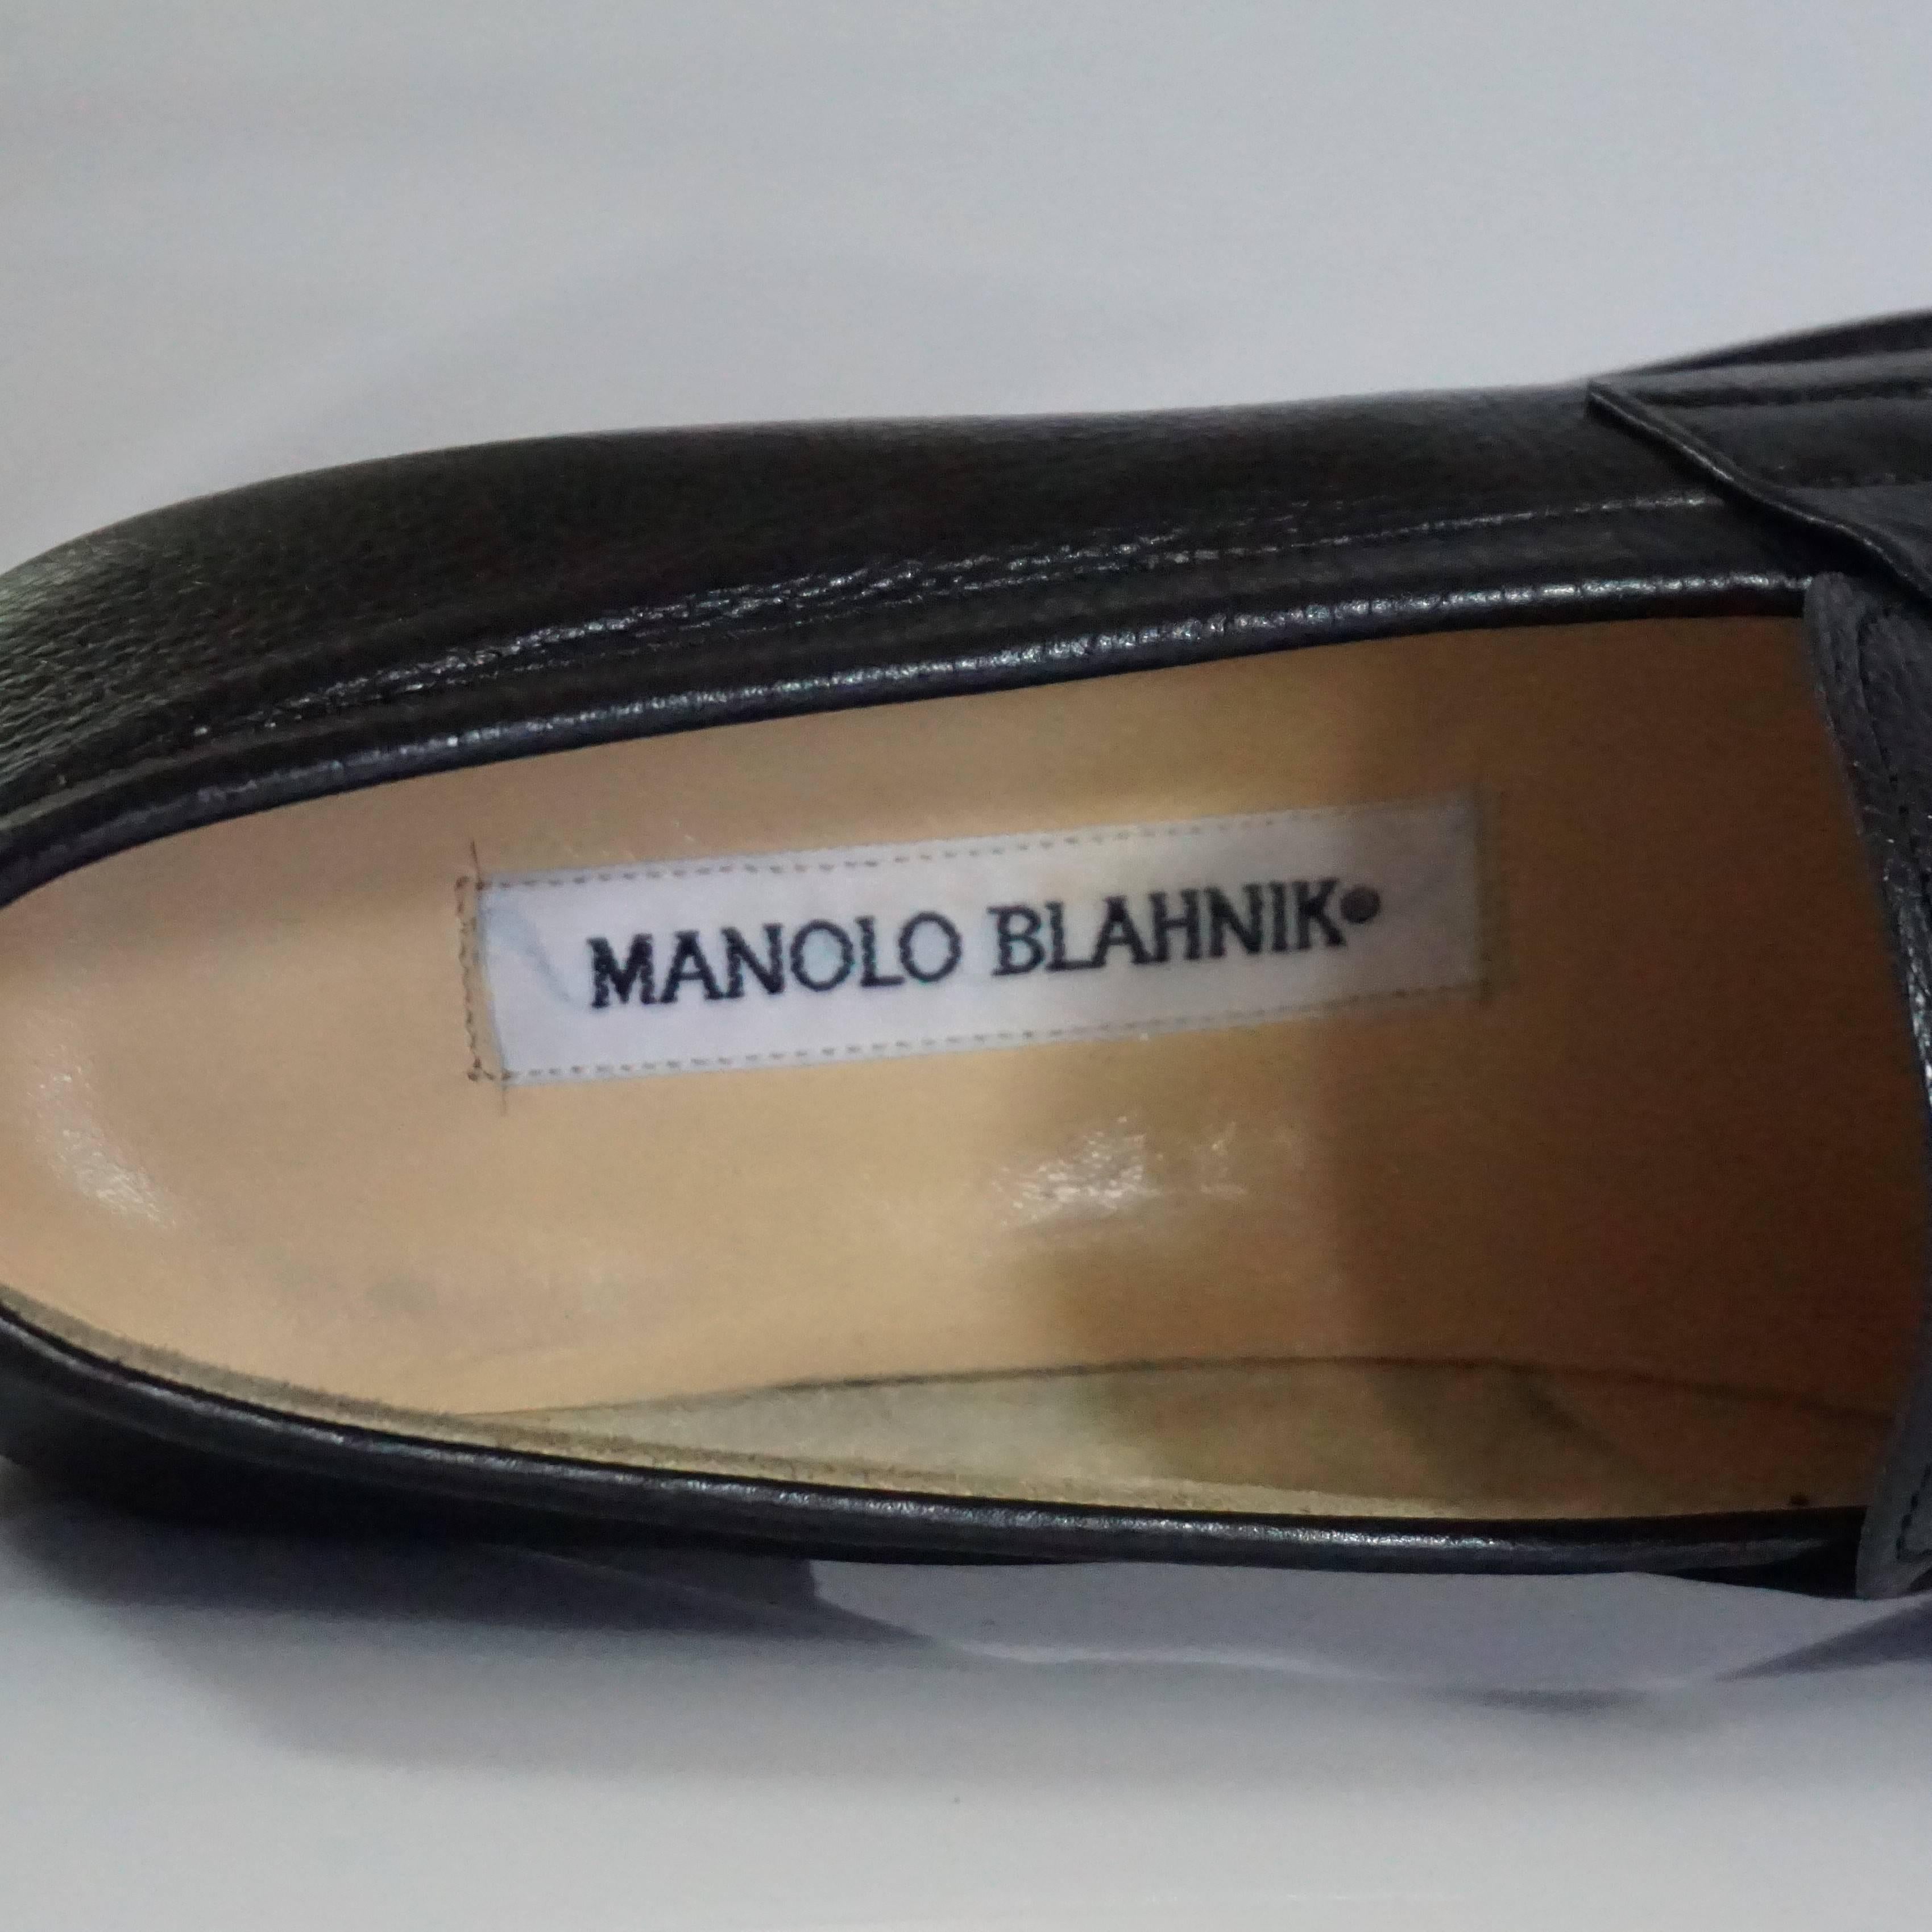 Manolo Blahnik Black Leather Penny Loafers -37.5 In Good Condition For Sale In West Palm Beach, FL